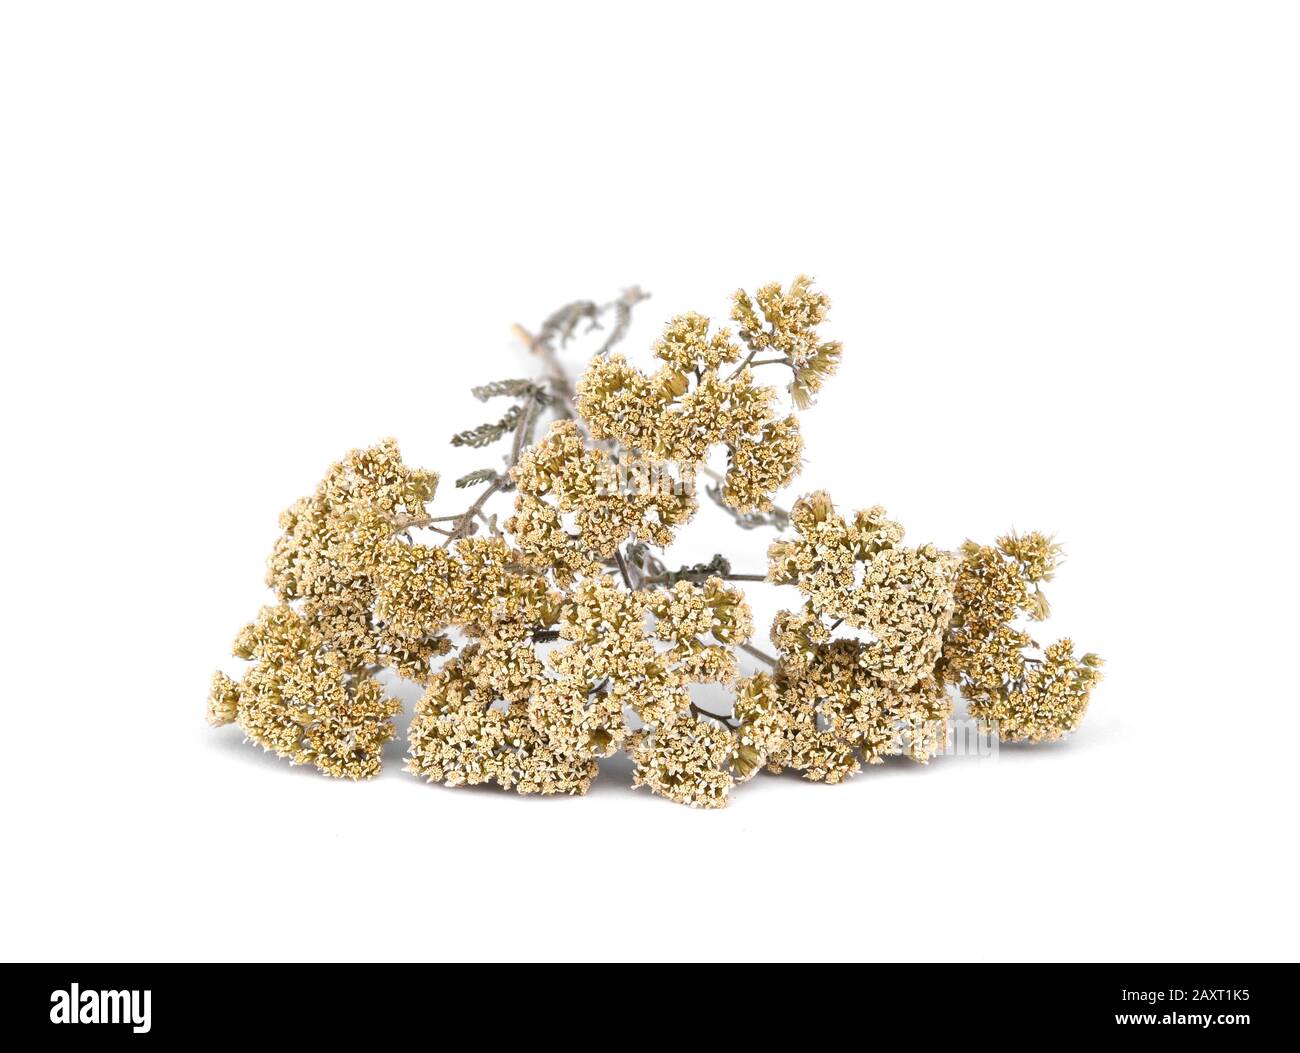 dried flowers of common yarrow isolated on white. Stock Photo